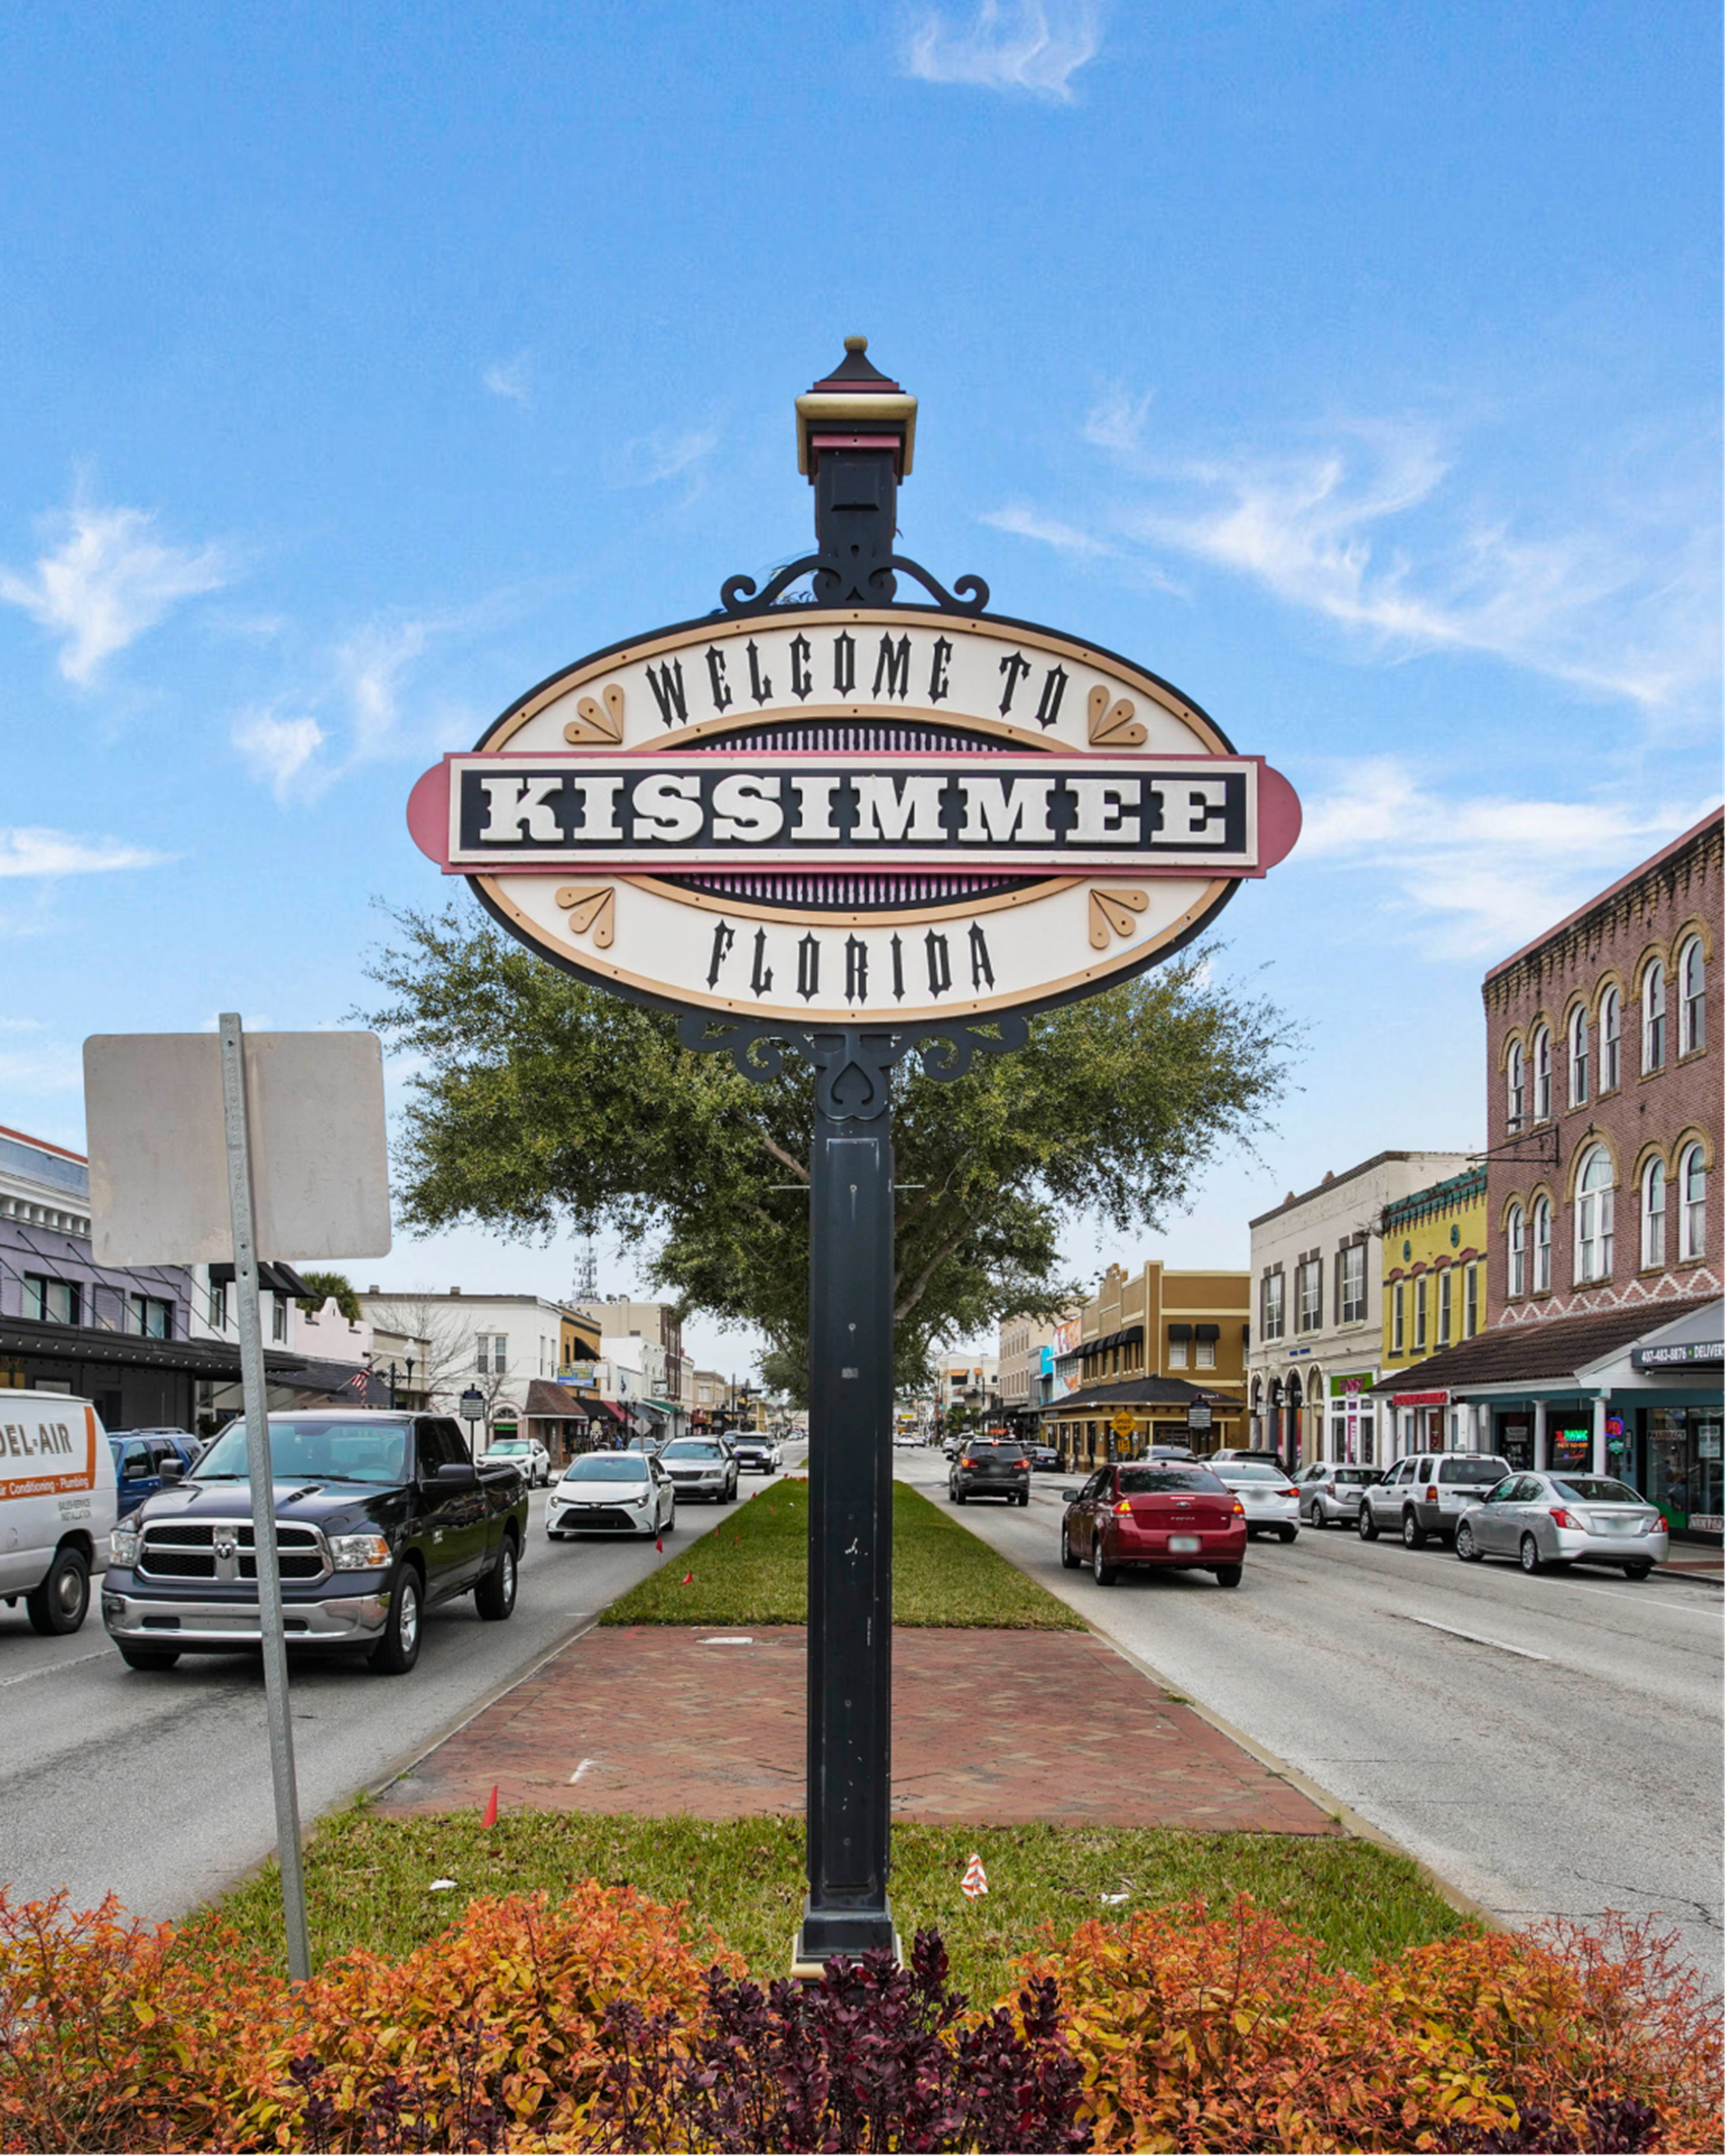 OLH_Kissimmee_Pic_DowntownKissimmee_6_Photoshoot_Collage1